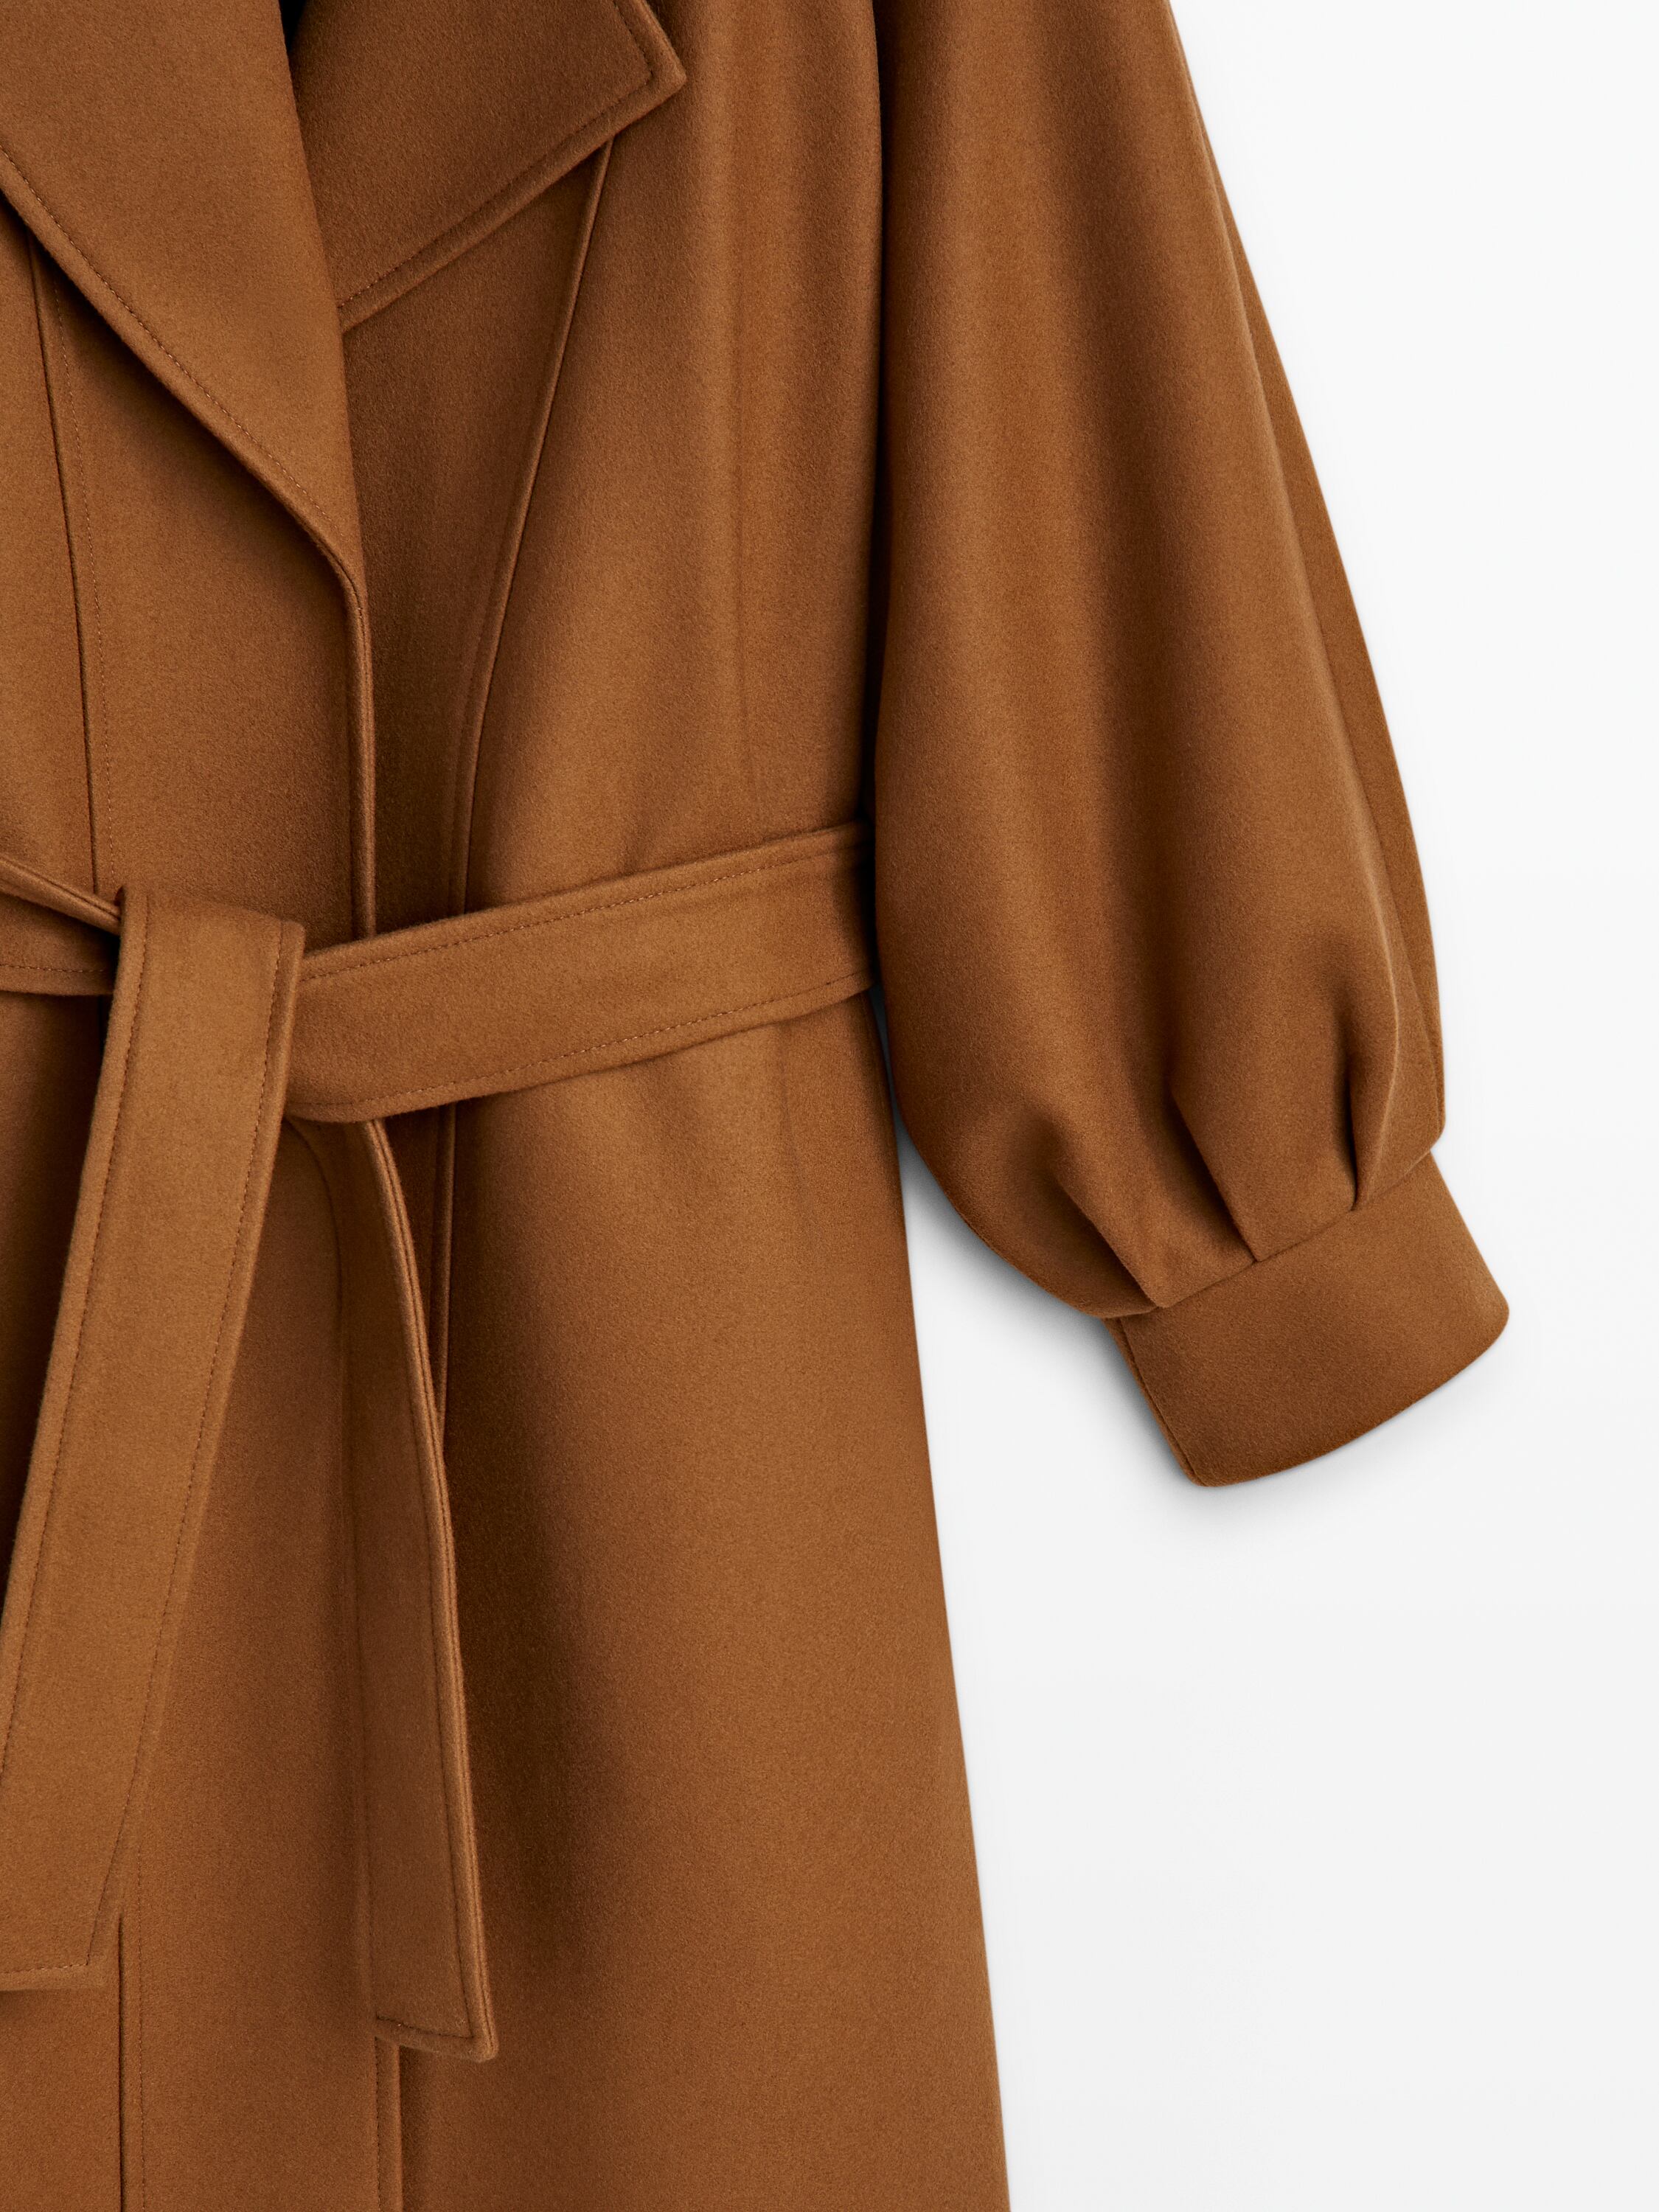 Belted coat with pleated detail and cuffs - Studio